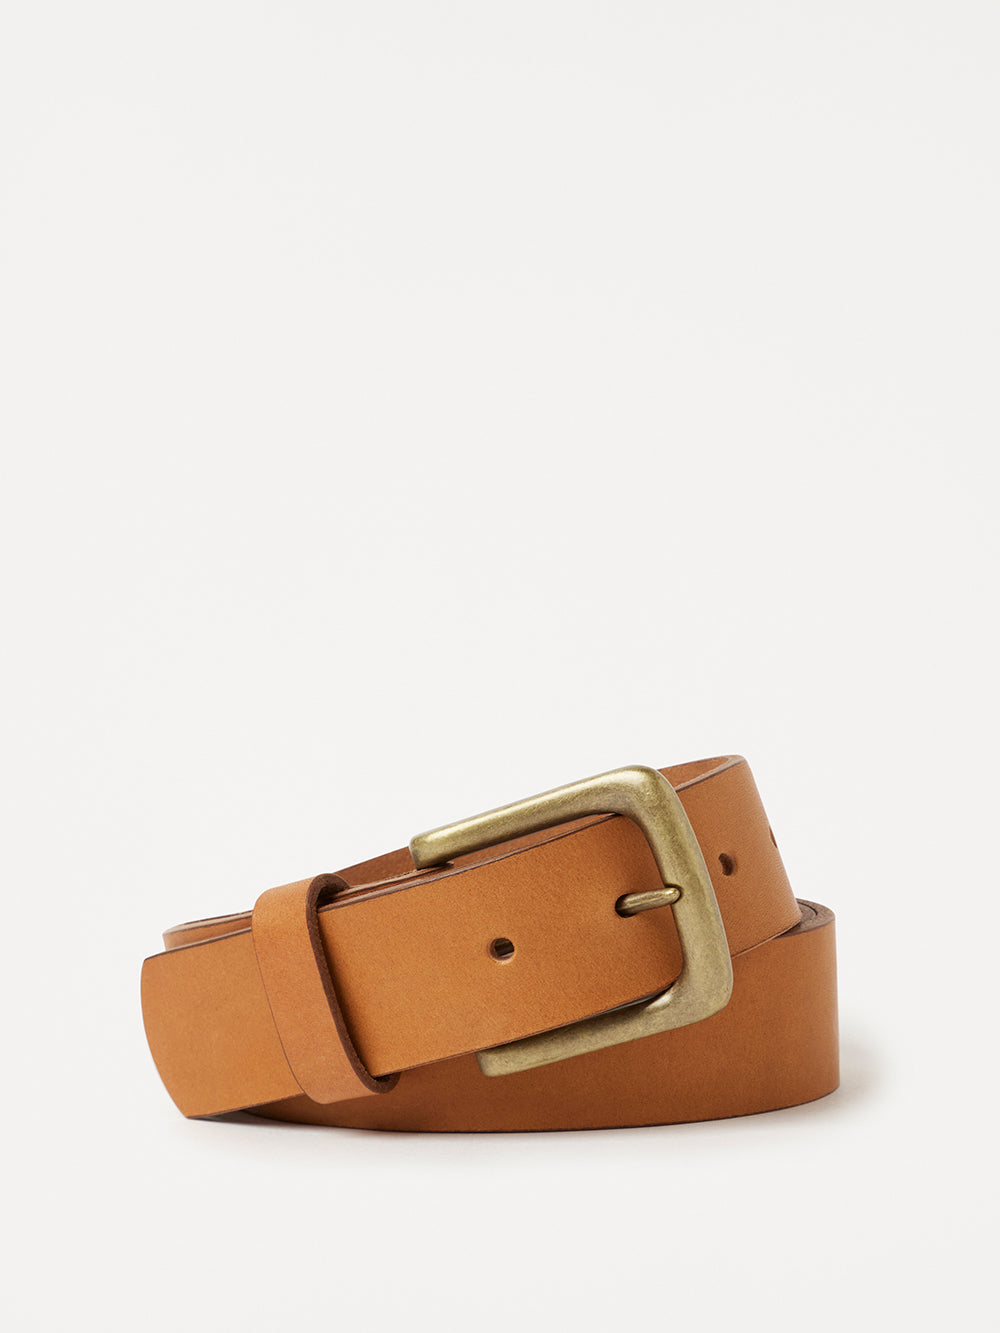 The Classic Leather Jean Belt